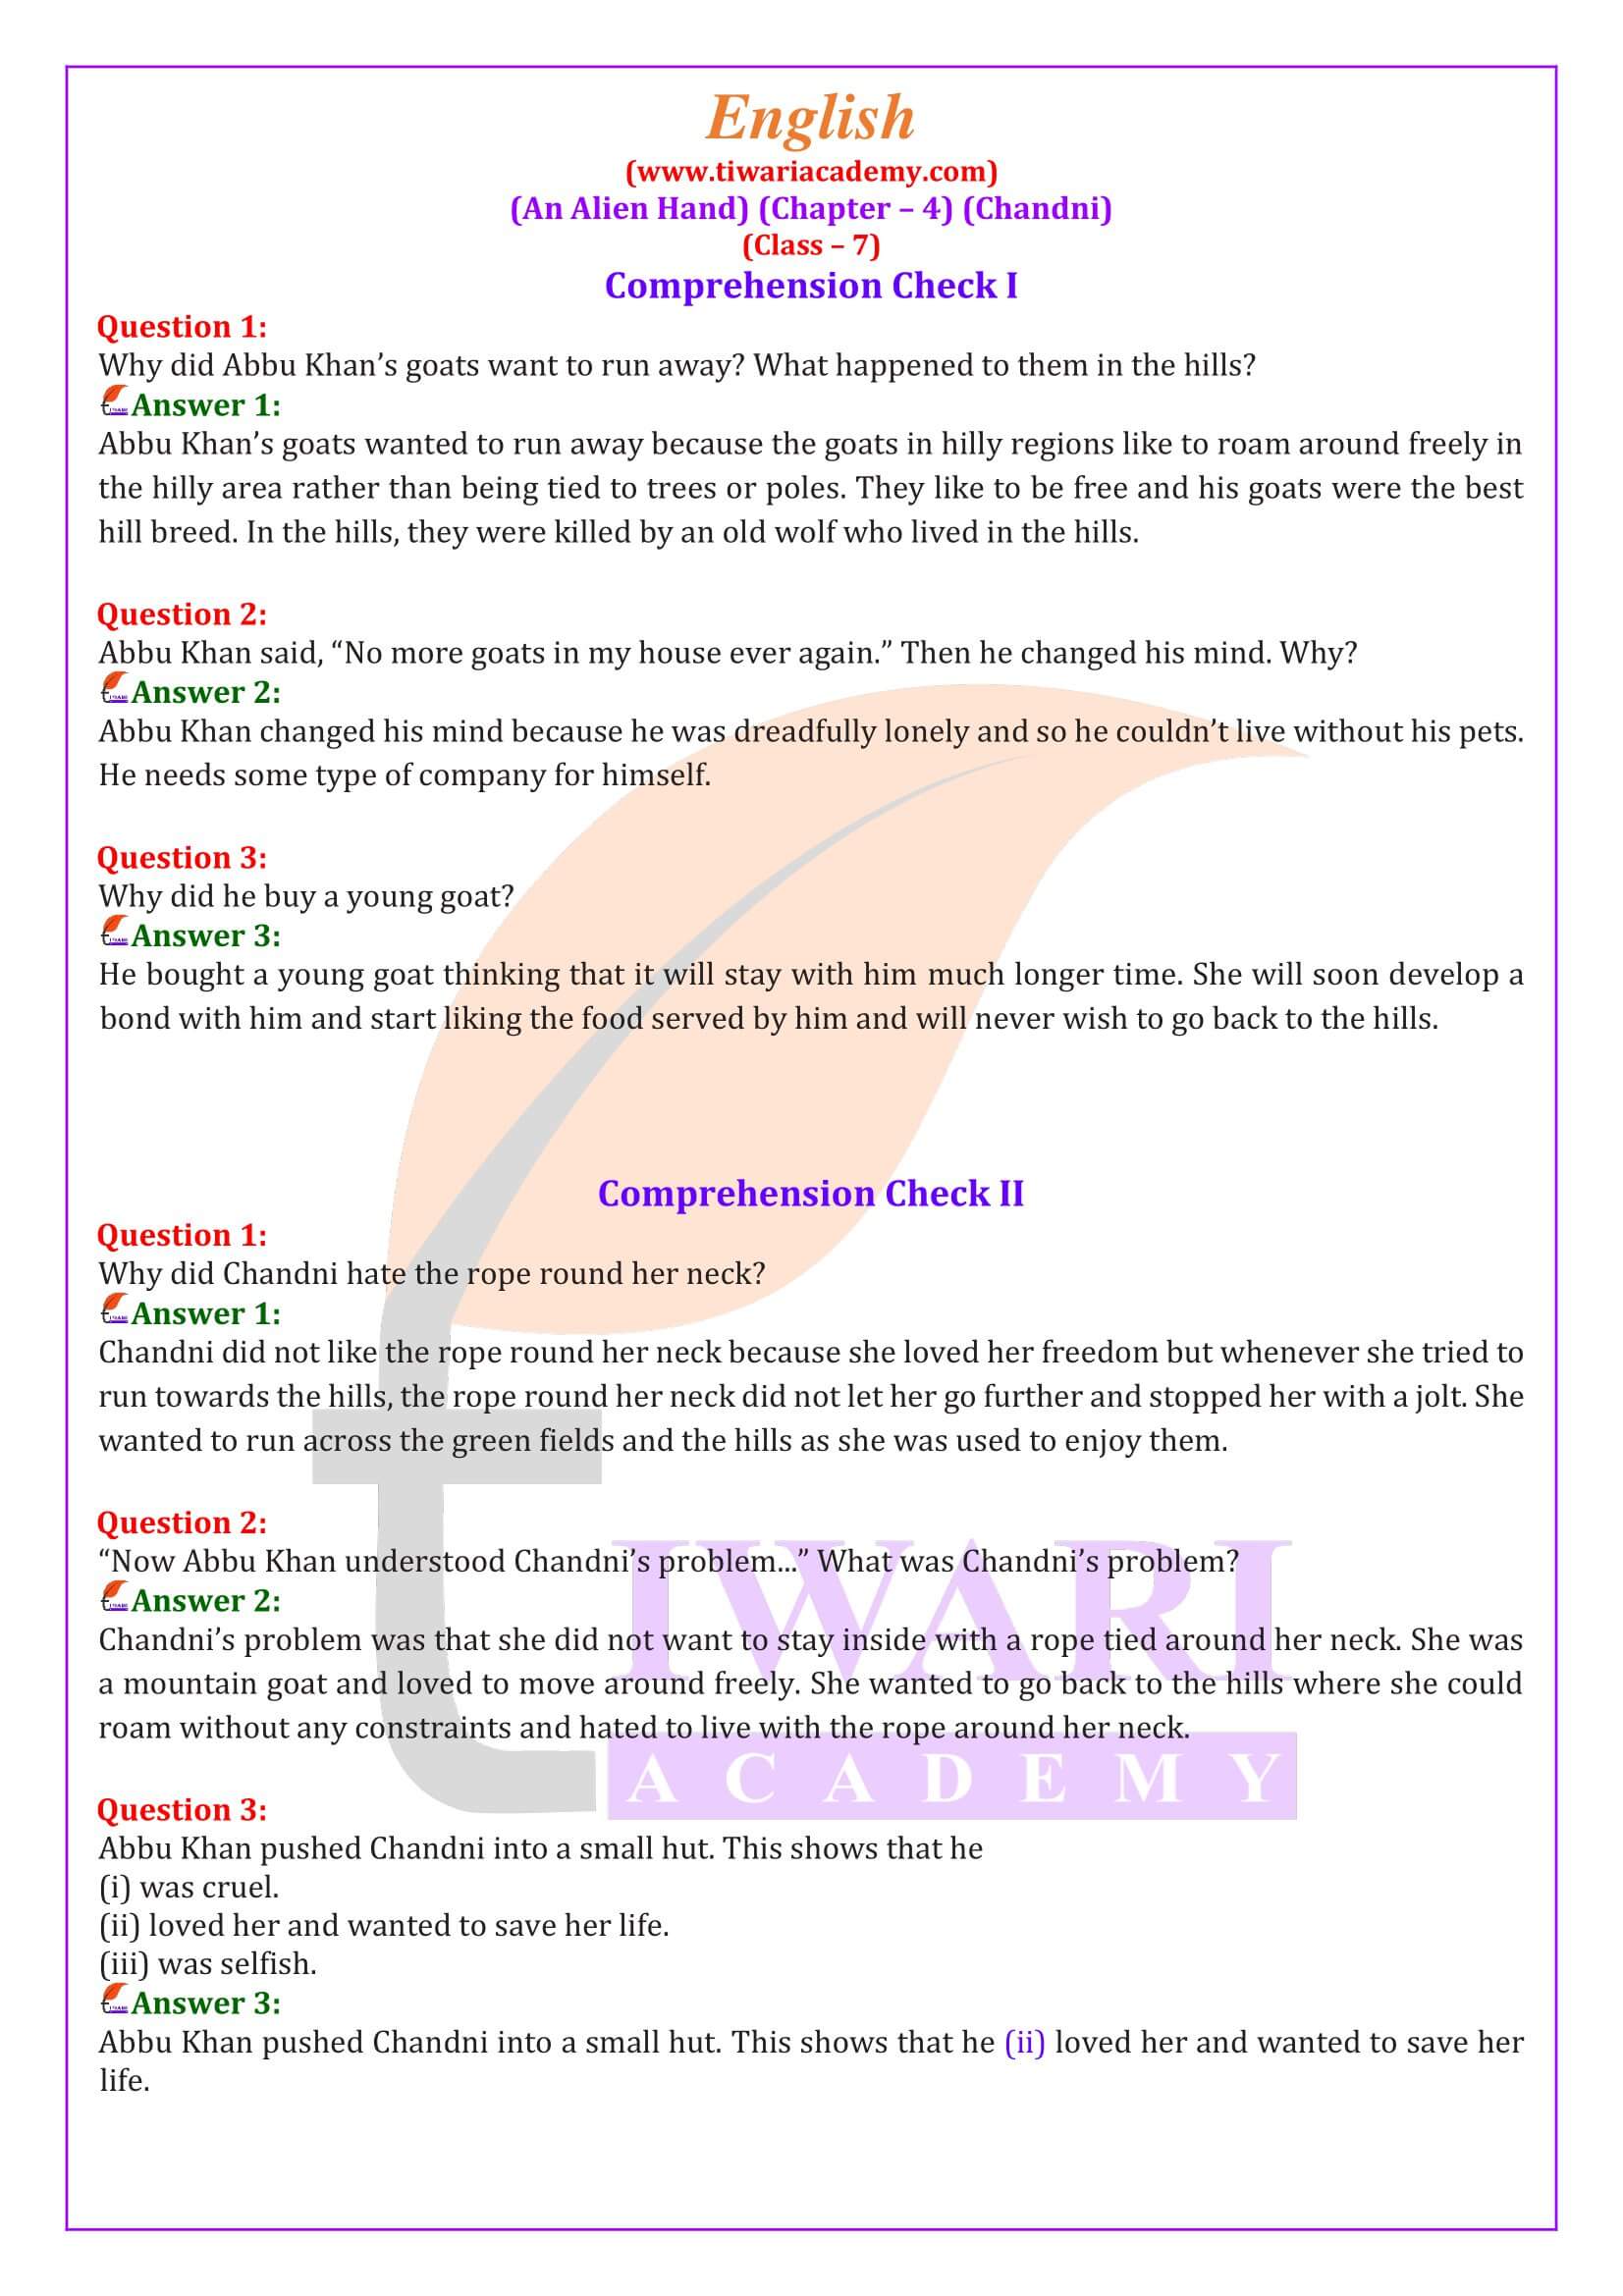 NCERT Solutions for Class 7 English an Alien Hand Chapter 4 Chandni